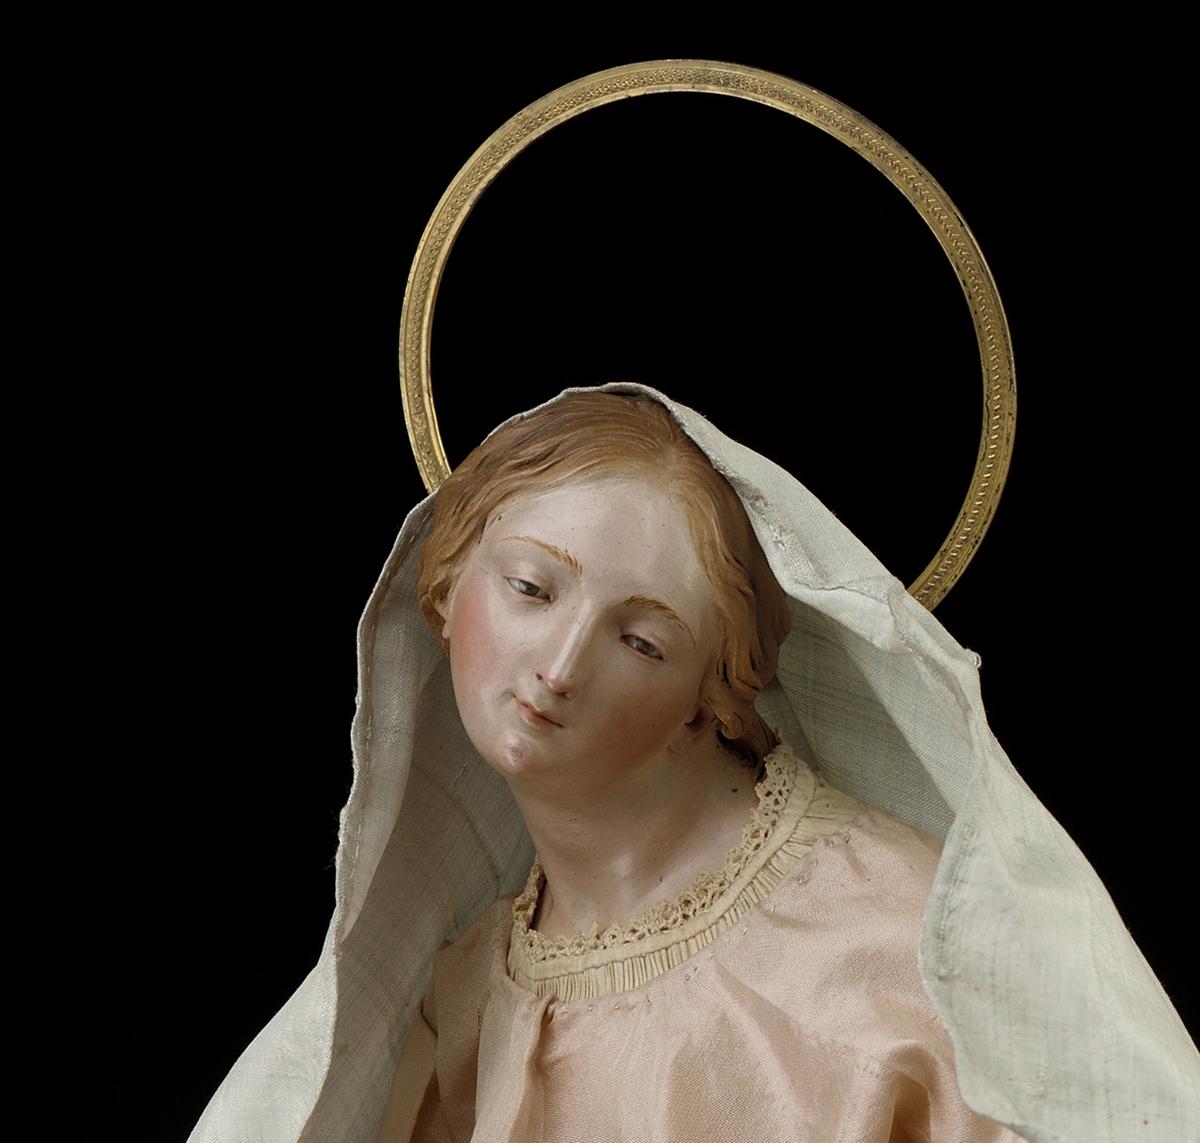 A detail of the Virgin's face from the crèche figurine by Giuseppe Sanmartino. (Public Domain)